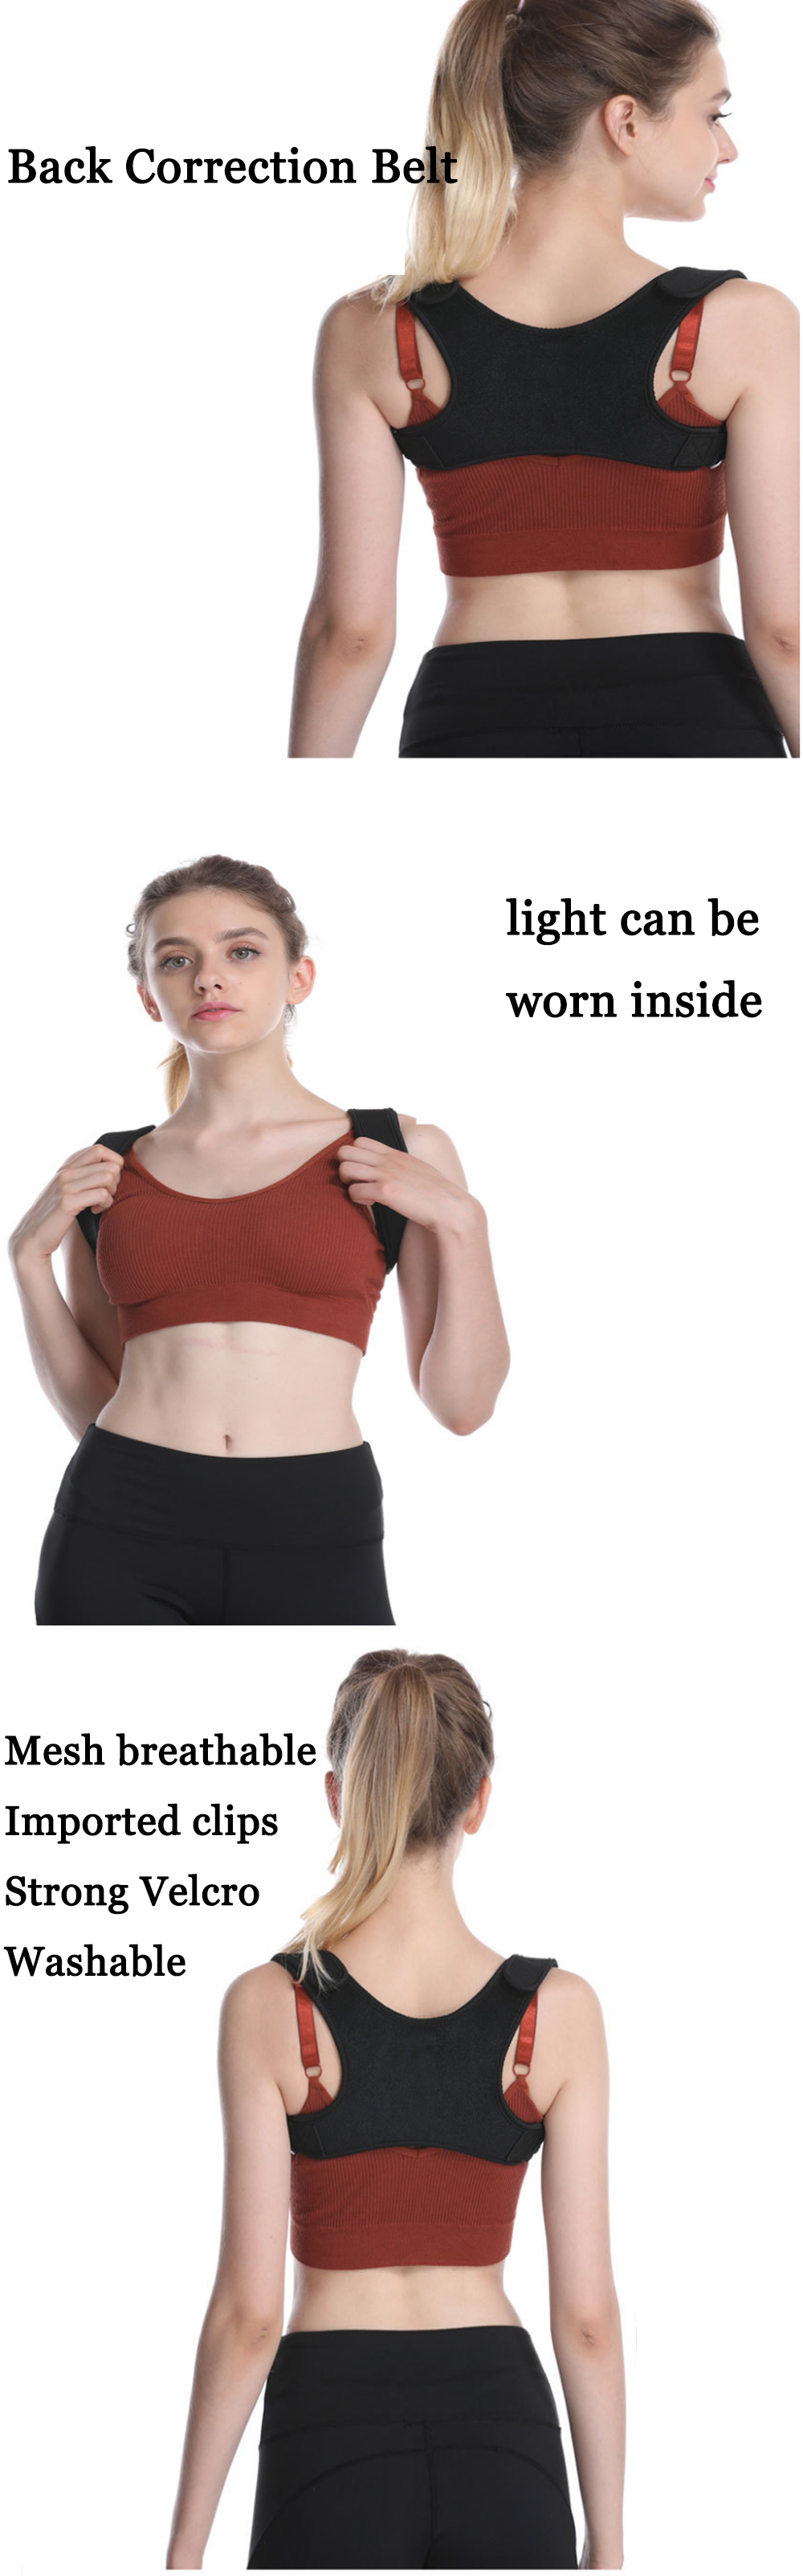 Rubber-Zipper-Strap-Back-Posture-Correction-Belt-Invisible-Anti-Hunchback-Thin-Portable-Sitting-Post-1839820-1